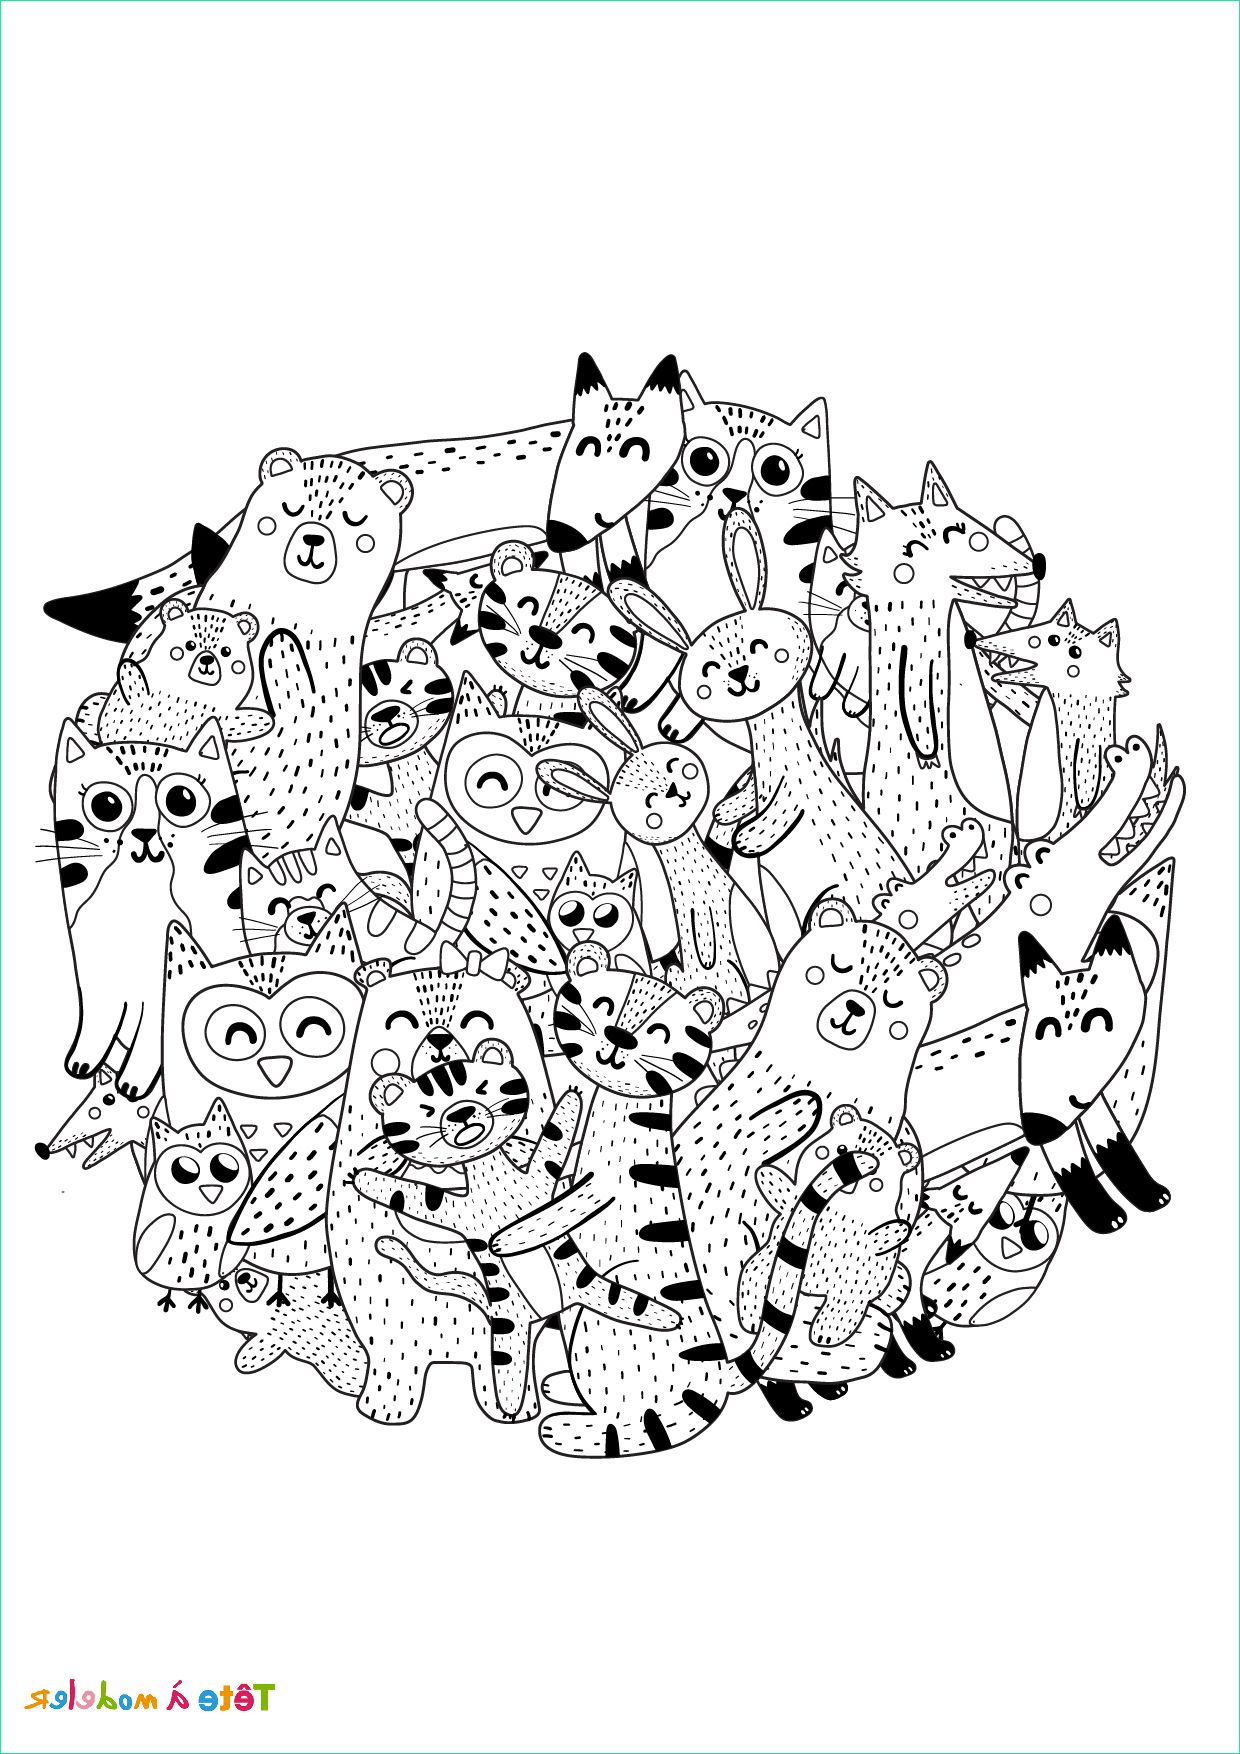 Coloriages Animaux Mignons Impressionnant Photos Coloriage Animaux Mignons Le Dessin De Tête à Modeler